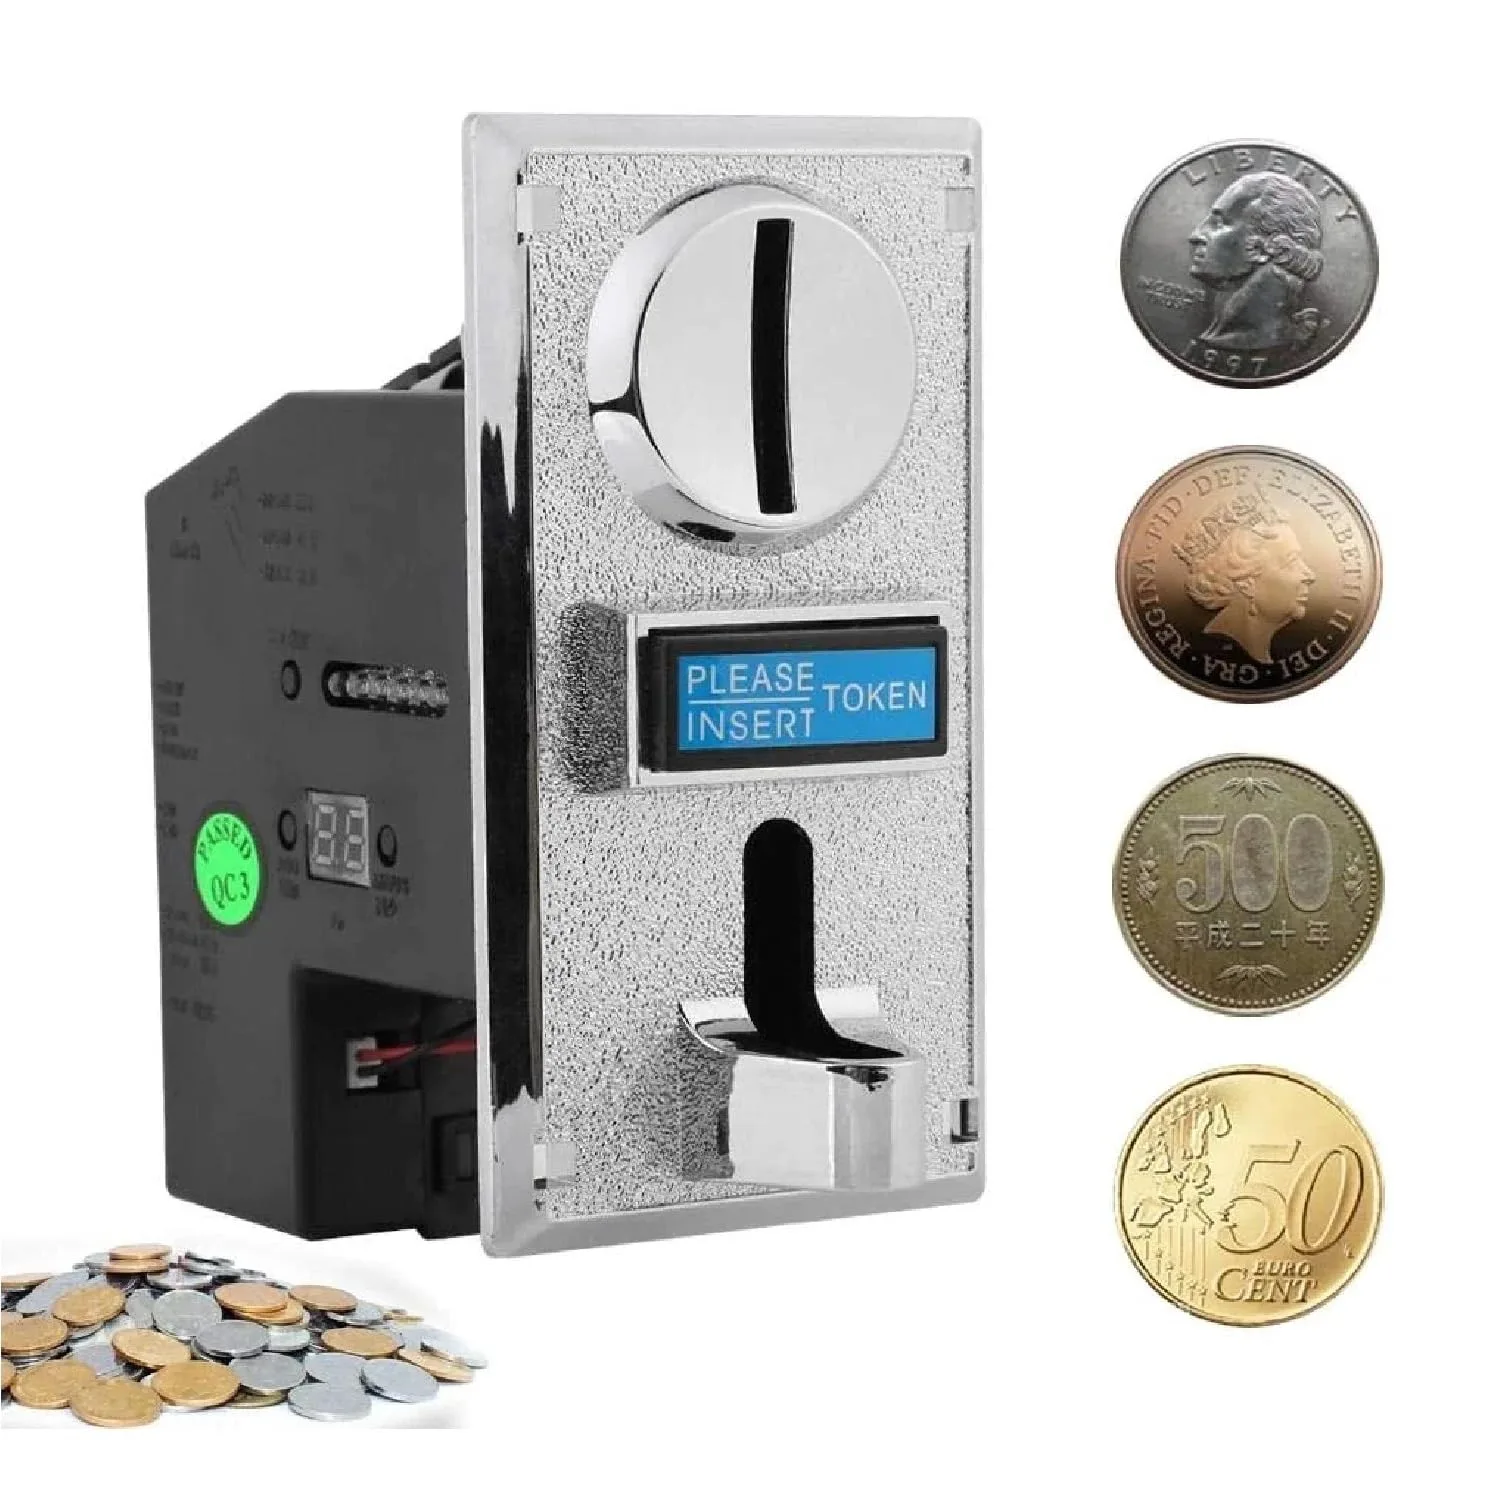 Multi Coin Acceptor Programable for Vending Machine